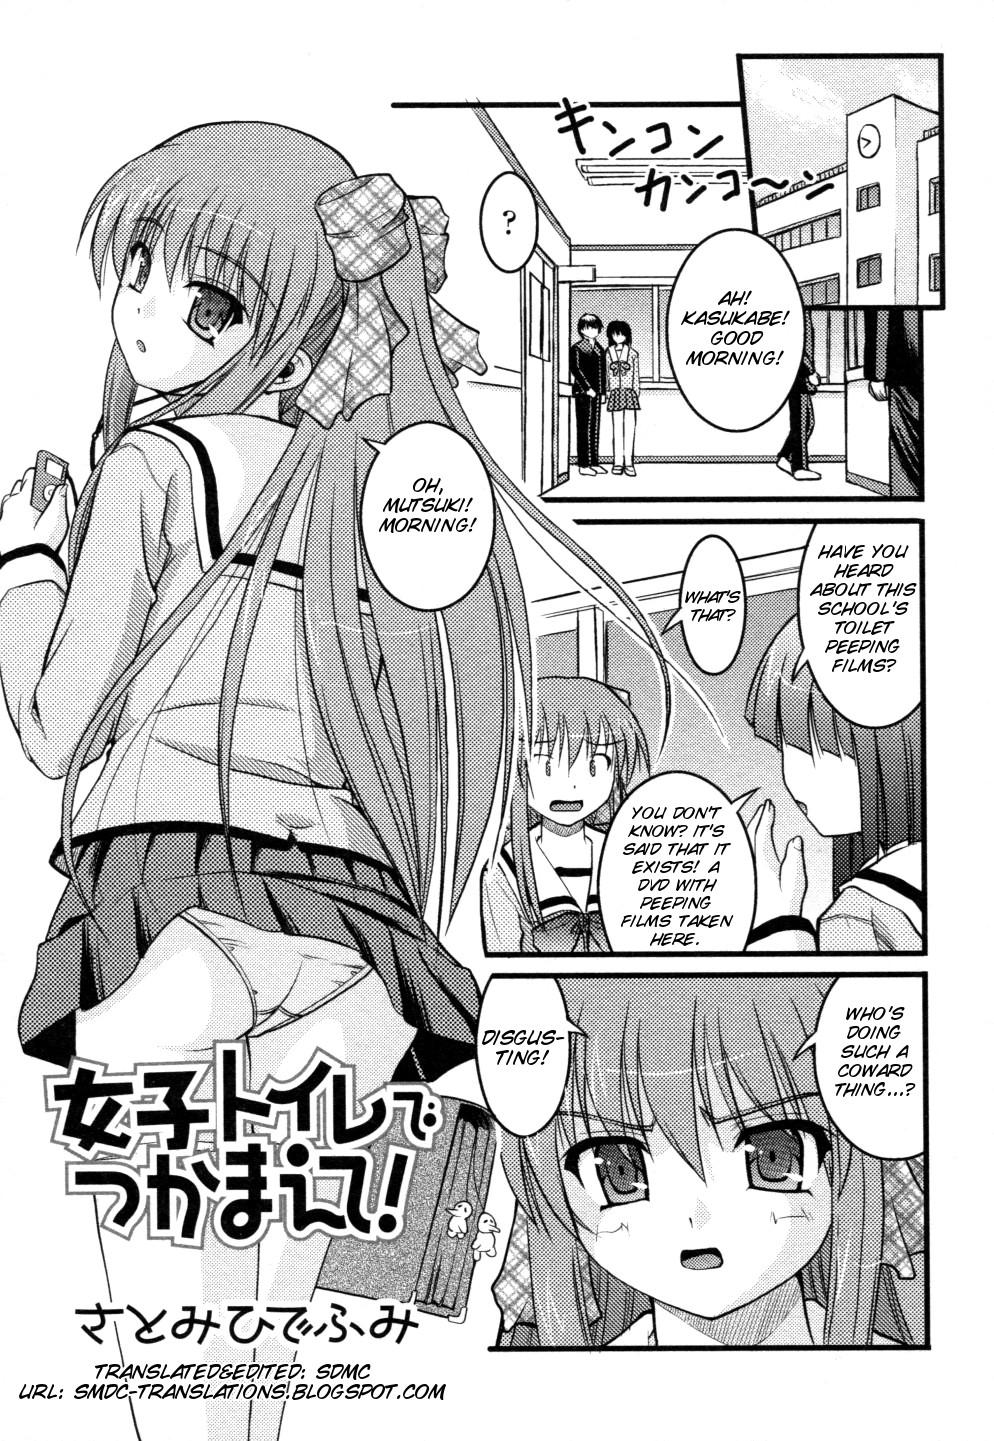 Que [Anthology Nozoite wa Ikenai 3](do not peep 3) ep4 [Satomi Hidefumi] - The Catcher in The Girl's Room(Eng) 18 Porn - Page 3